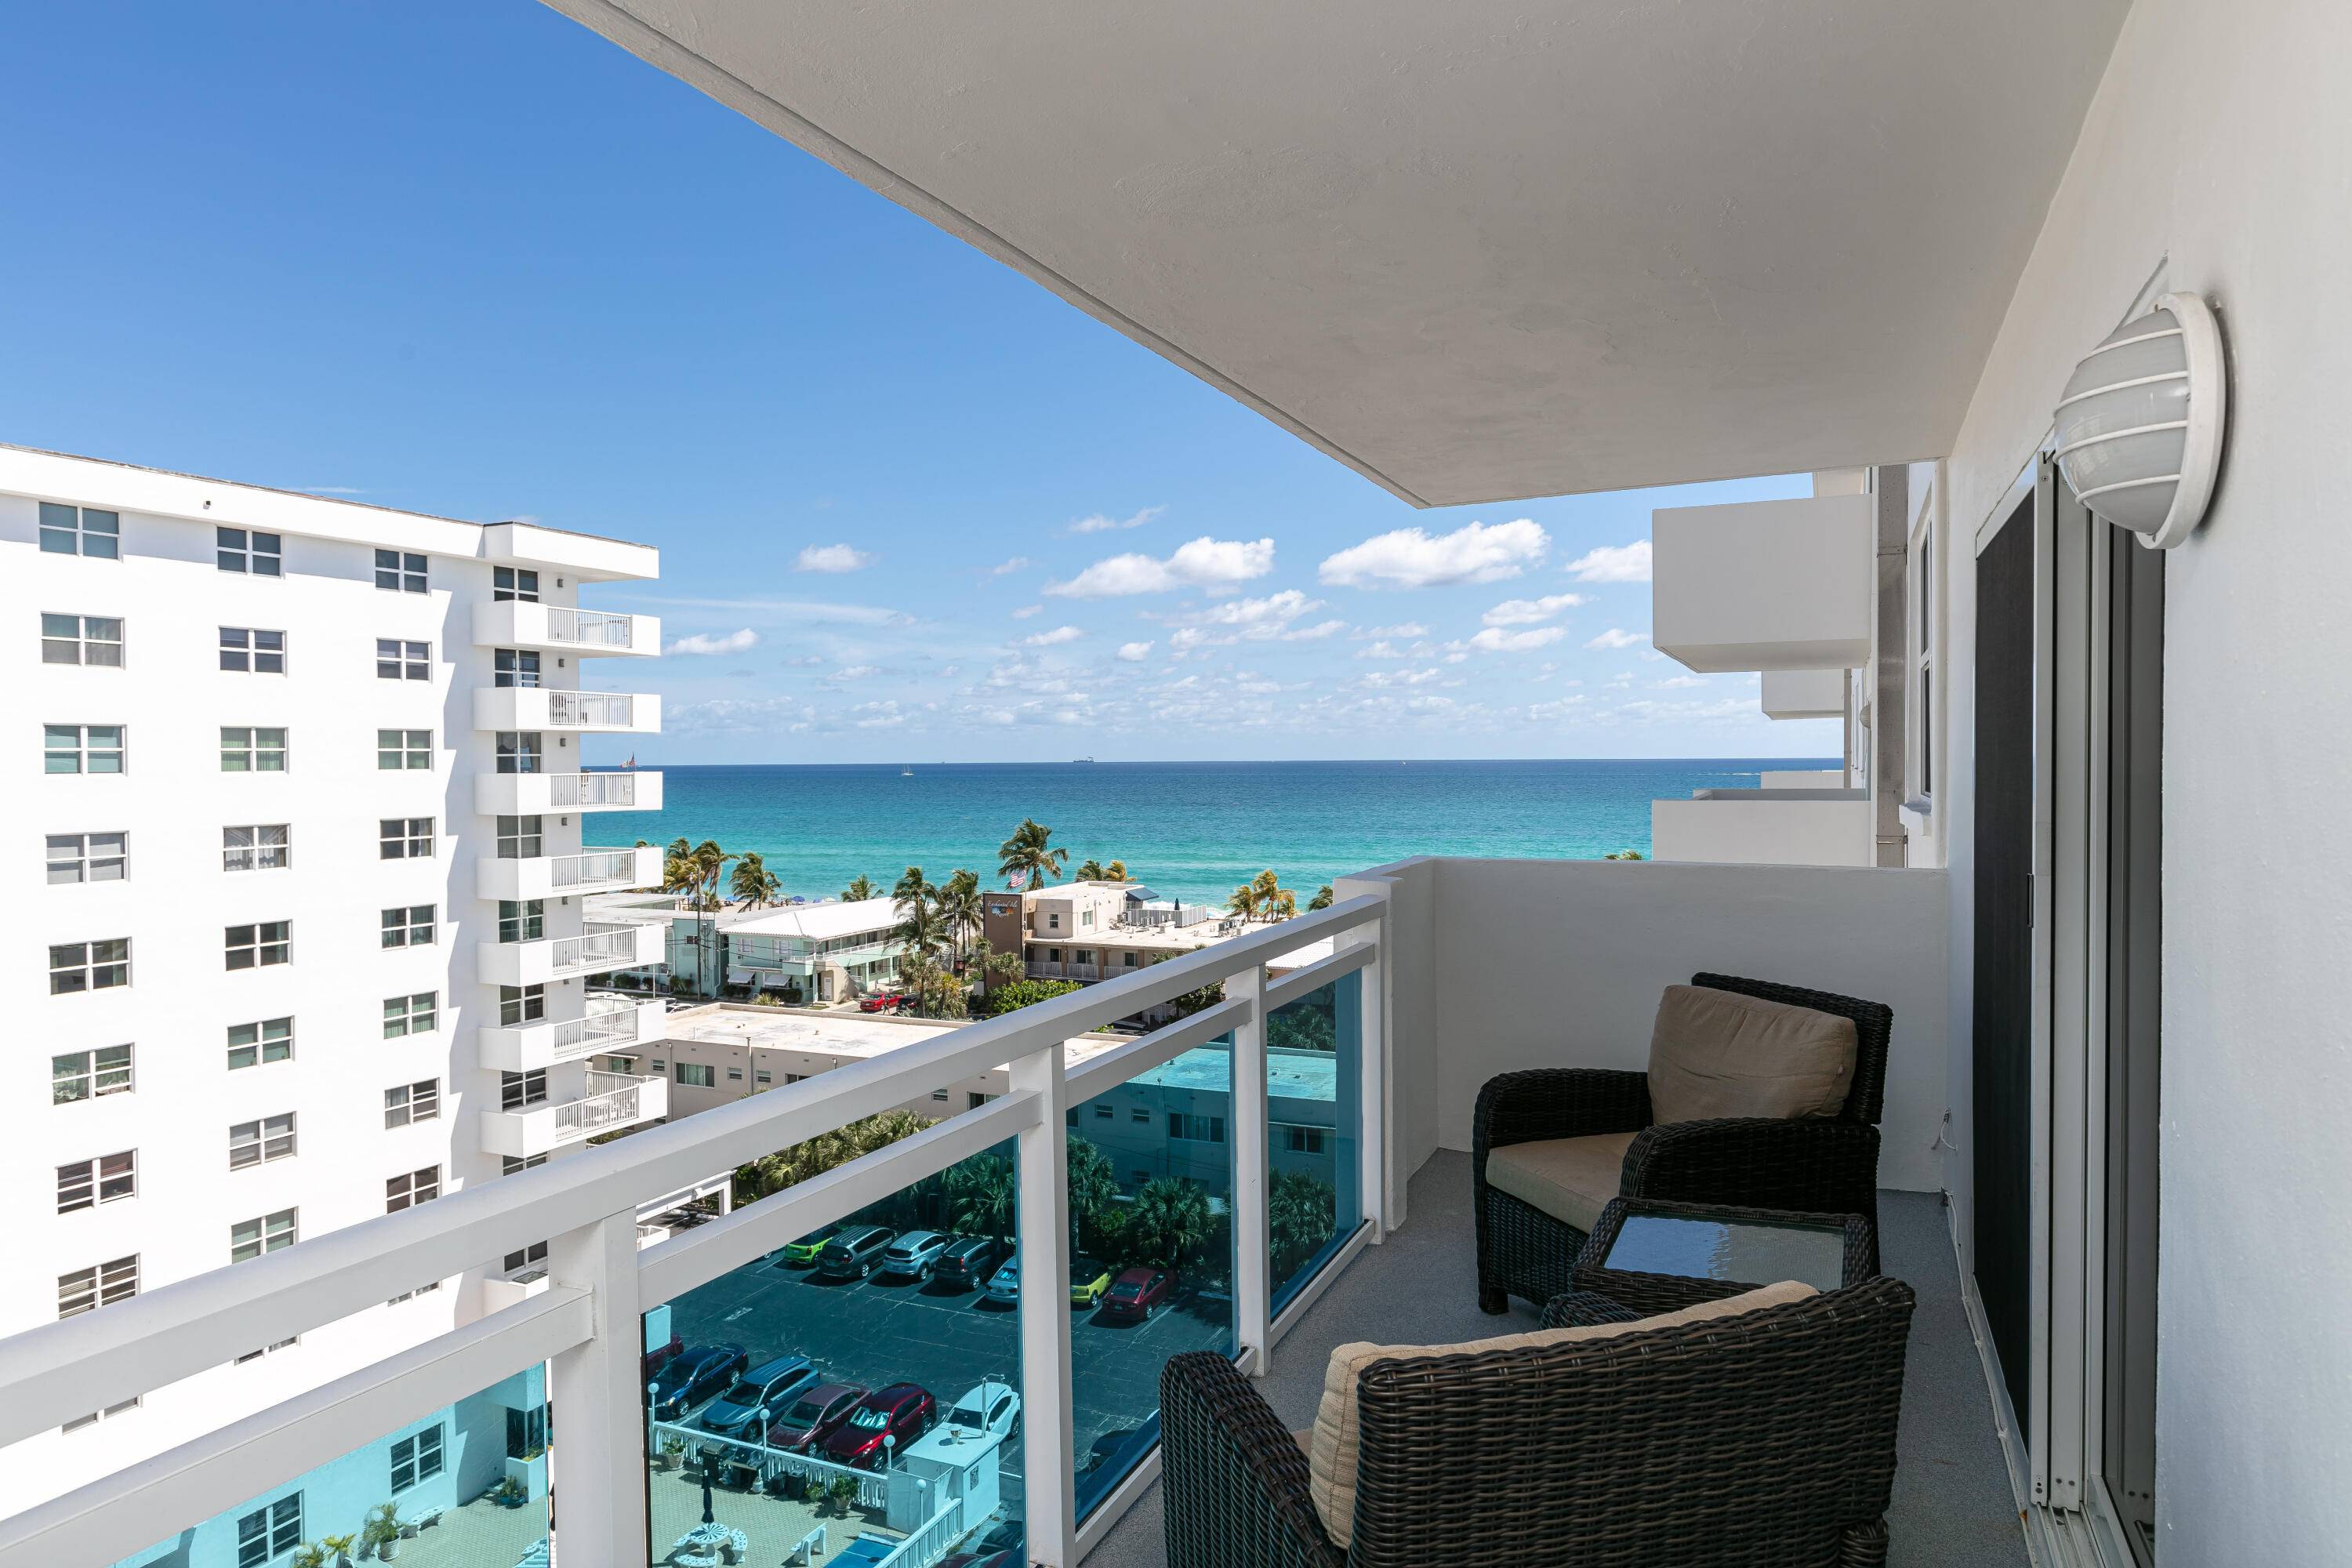 Enjoy Ocean and Intracoastal views from the covered balcony of this newly renovated Hollywood Beach condominium.